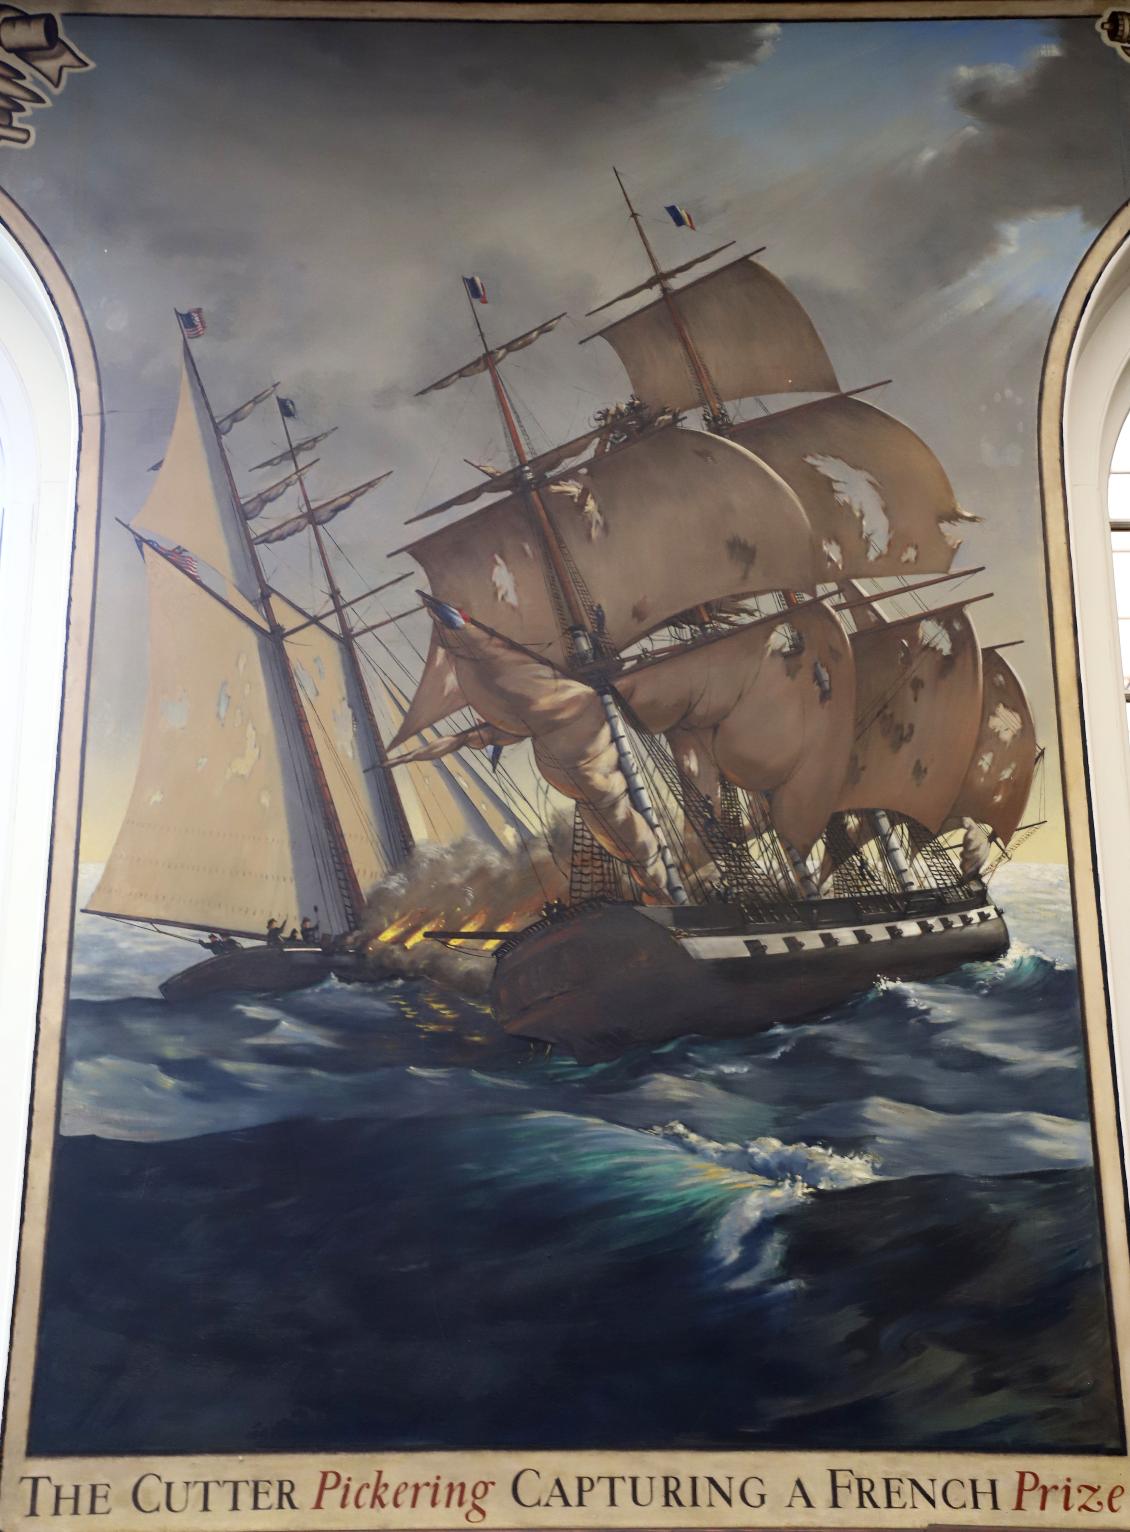 U.S. Coast Guard Academy - Hamilton Hall Mural - Cutter Pickering Capture French Prize